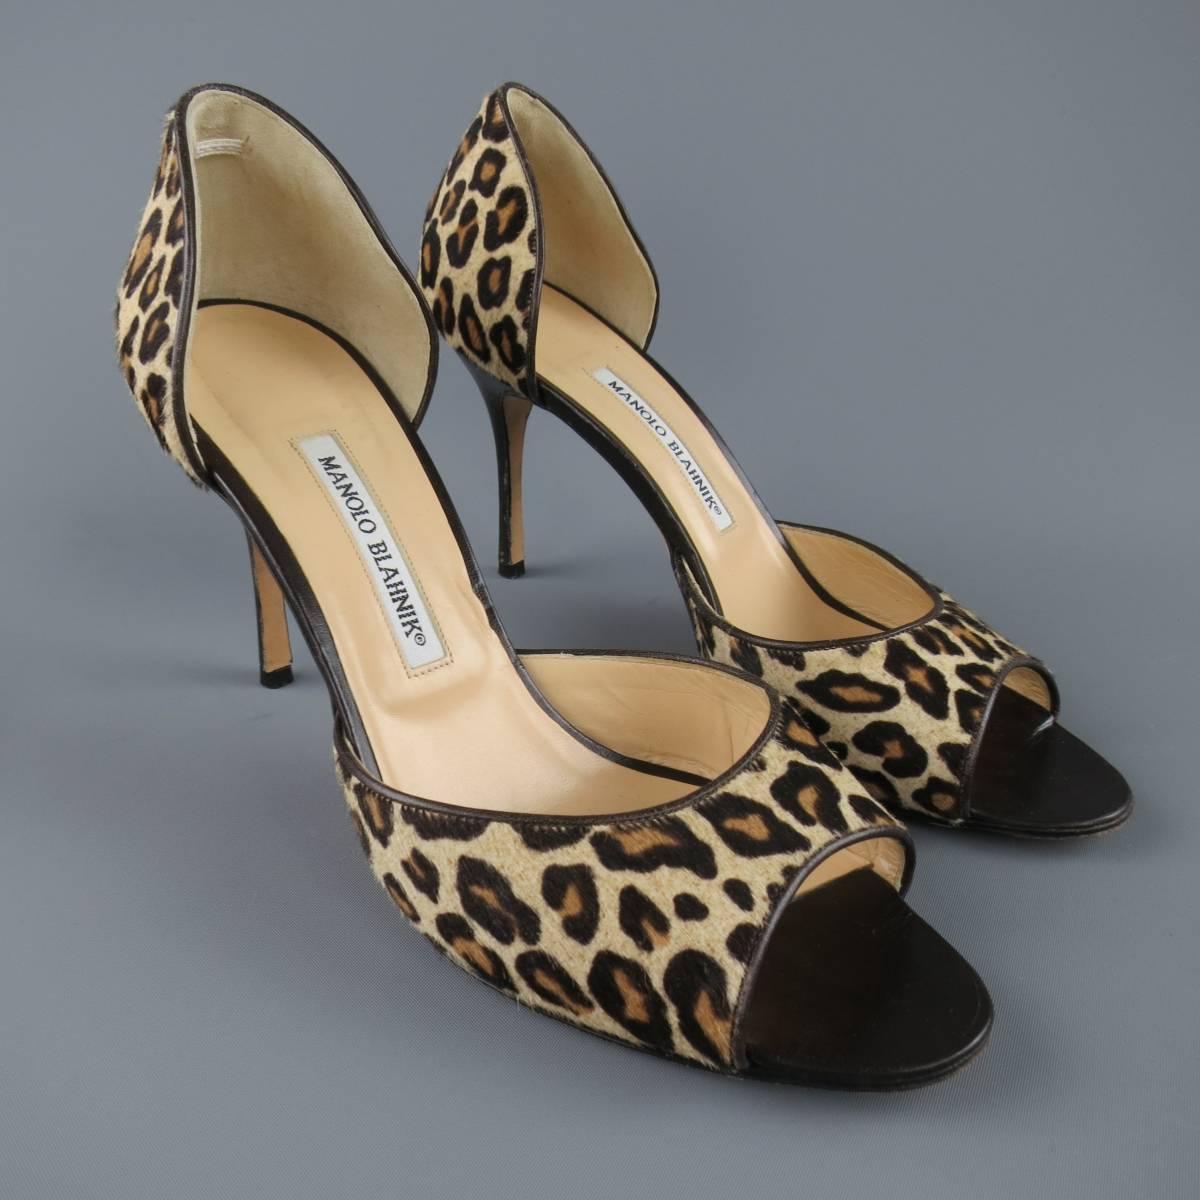 These MANOLO BLAHNIK pumps come in a leopard cheethah print with brown leather piping and features a peep toe, stacked stiletto heel,  and D'orsay style. Made in Italy.
 
Good Pre-Owned Condition.
Marked: IT 40.5
 
Heel: 3.75 in.


Web ID: 82243 
